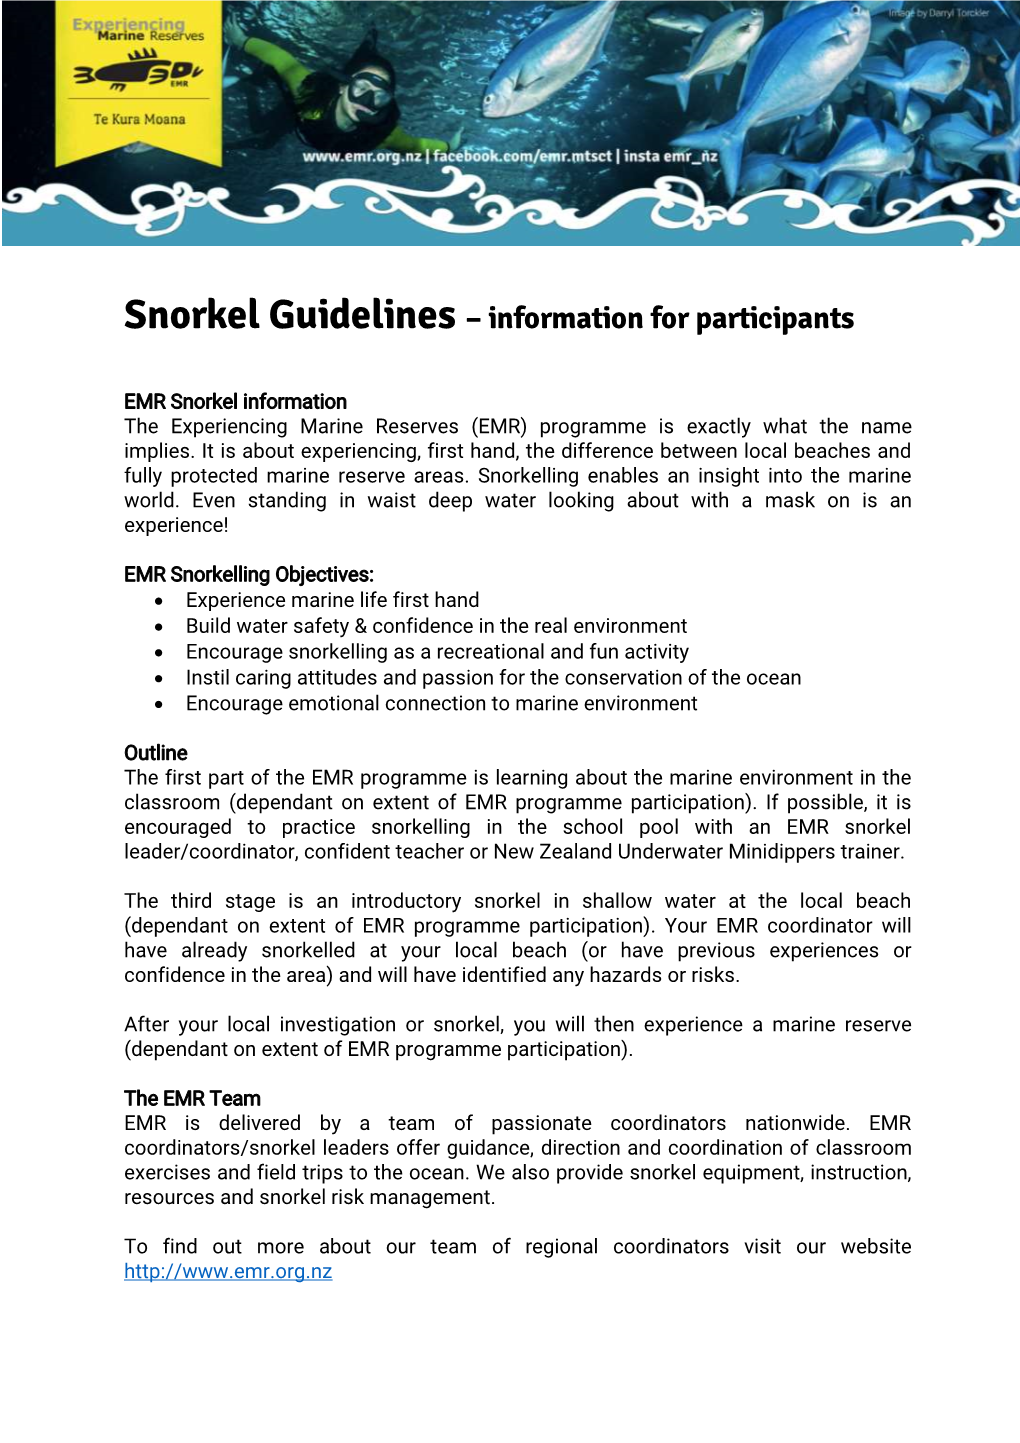 Snorkel Guidelines – Information for Participants